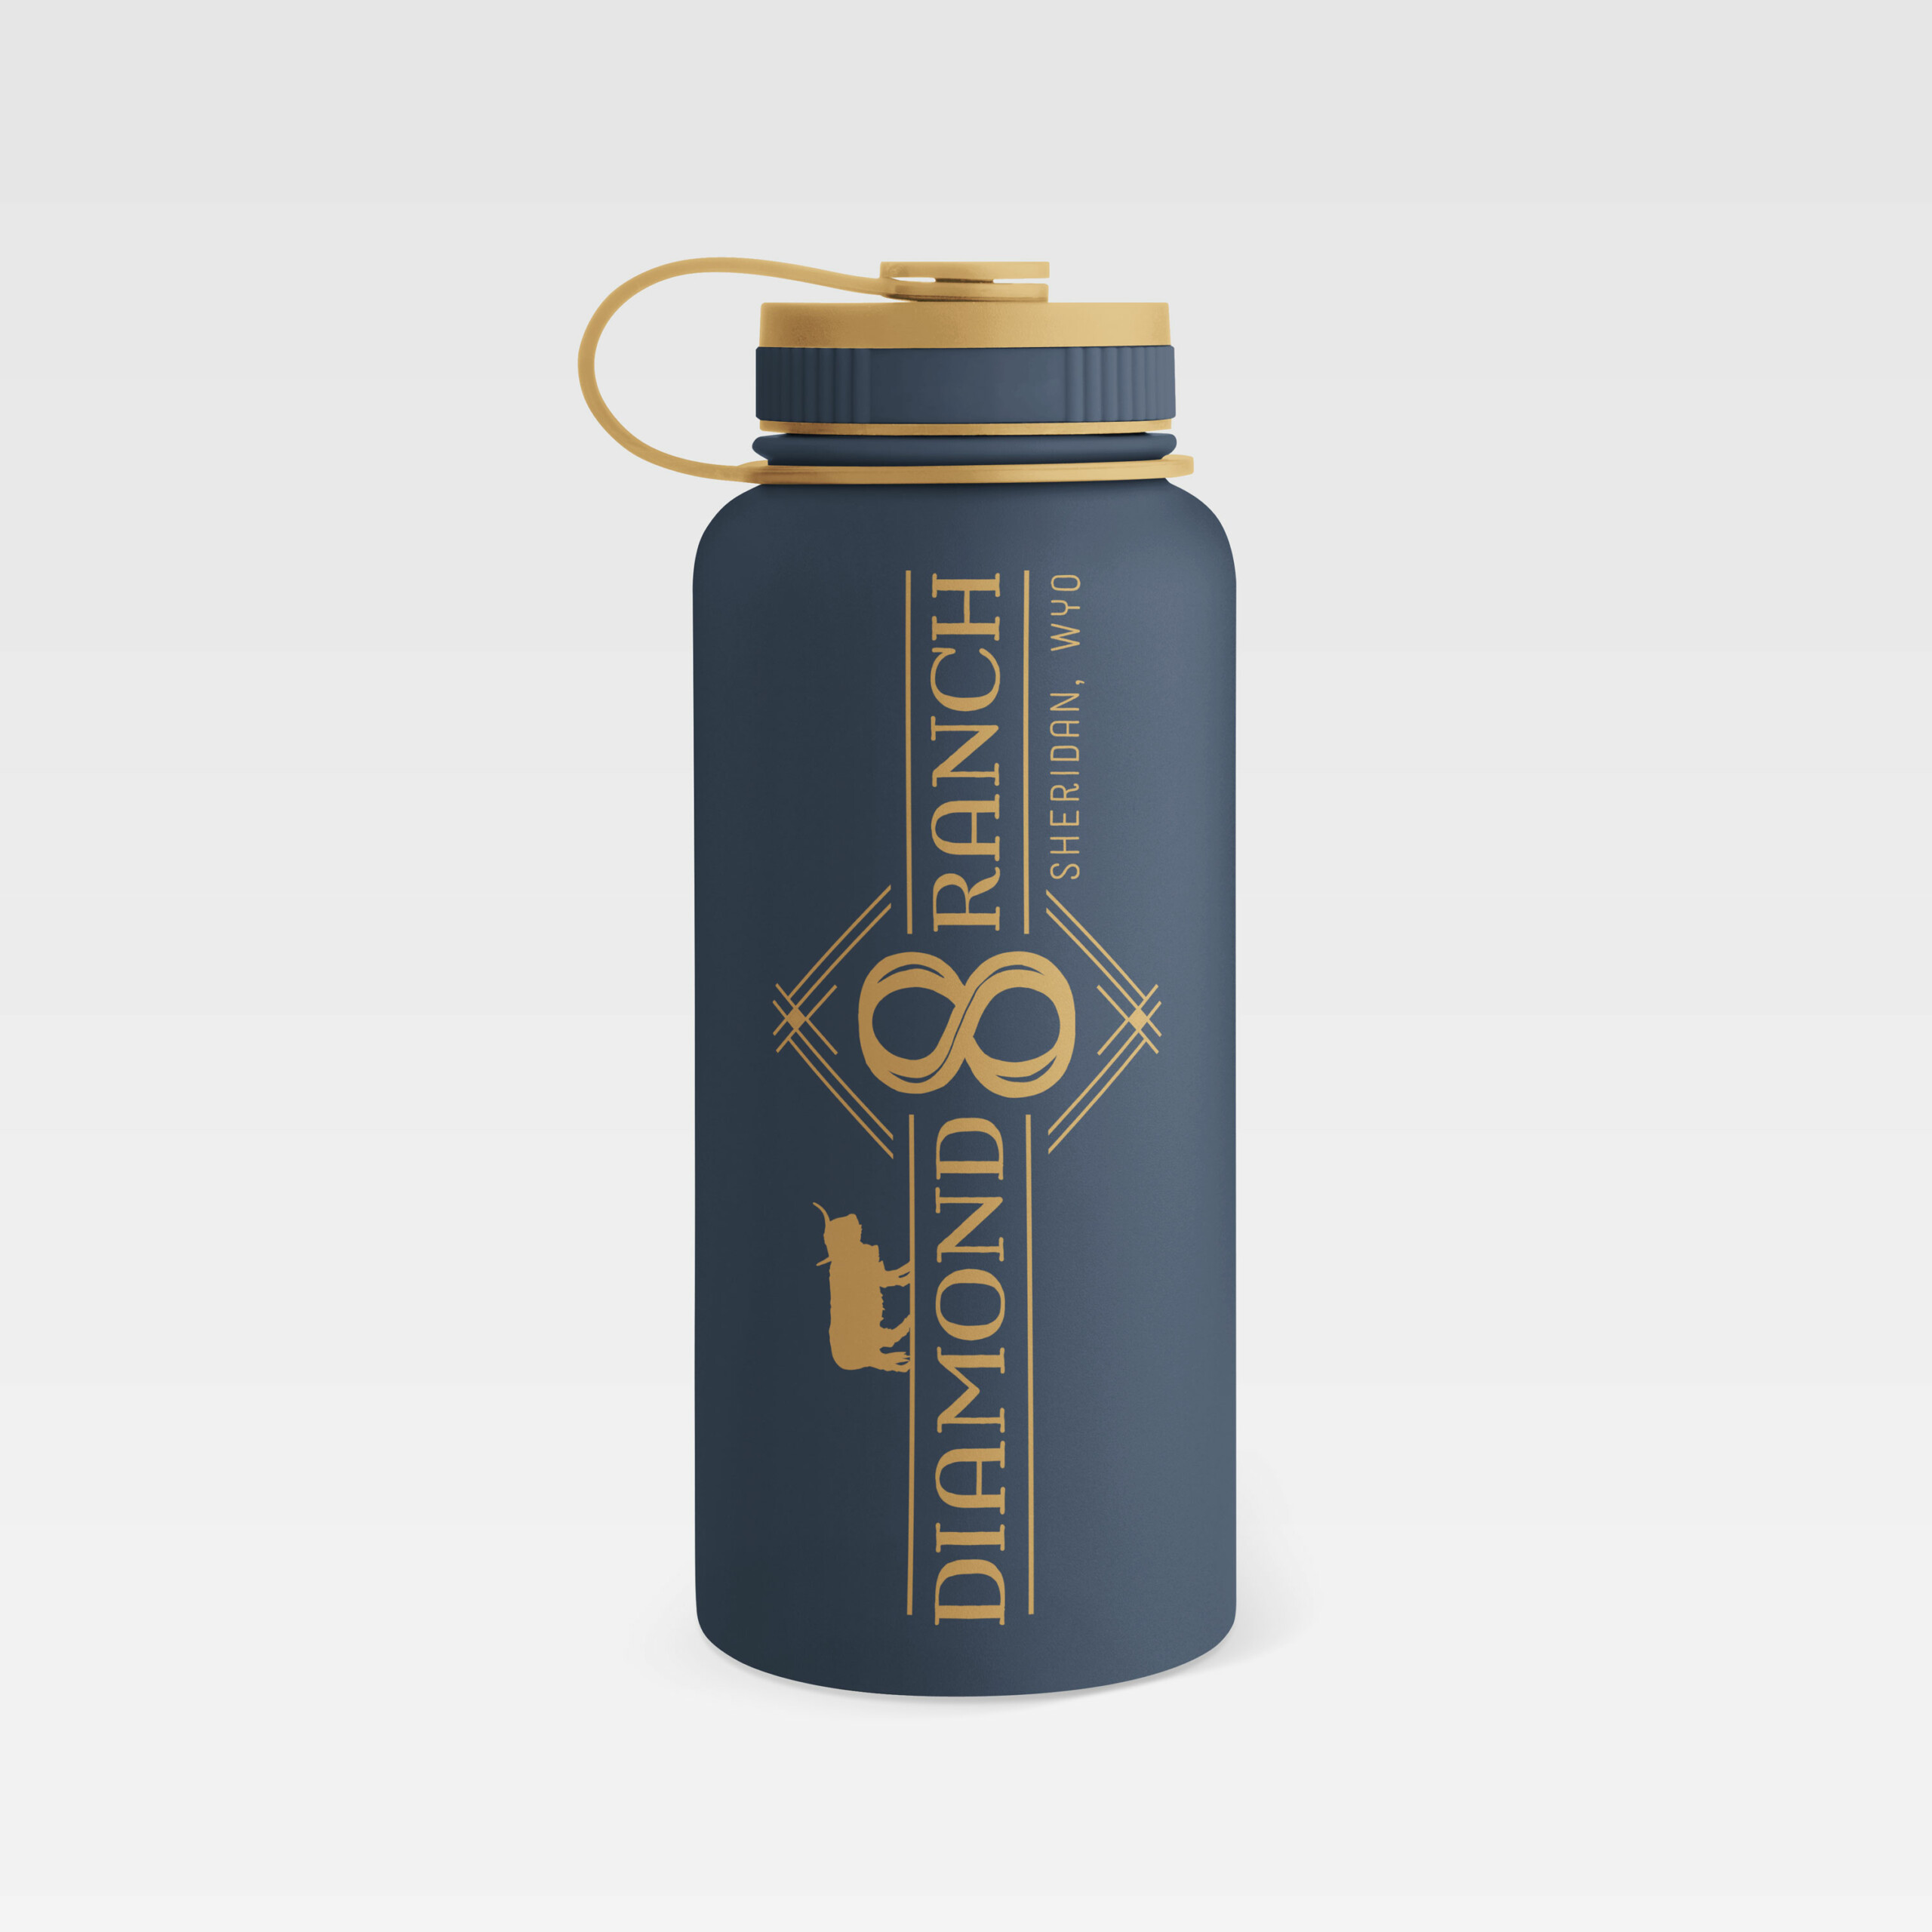 water bottle showing logo and branding for highland cow ranch in wyoming